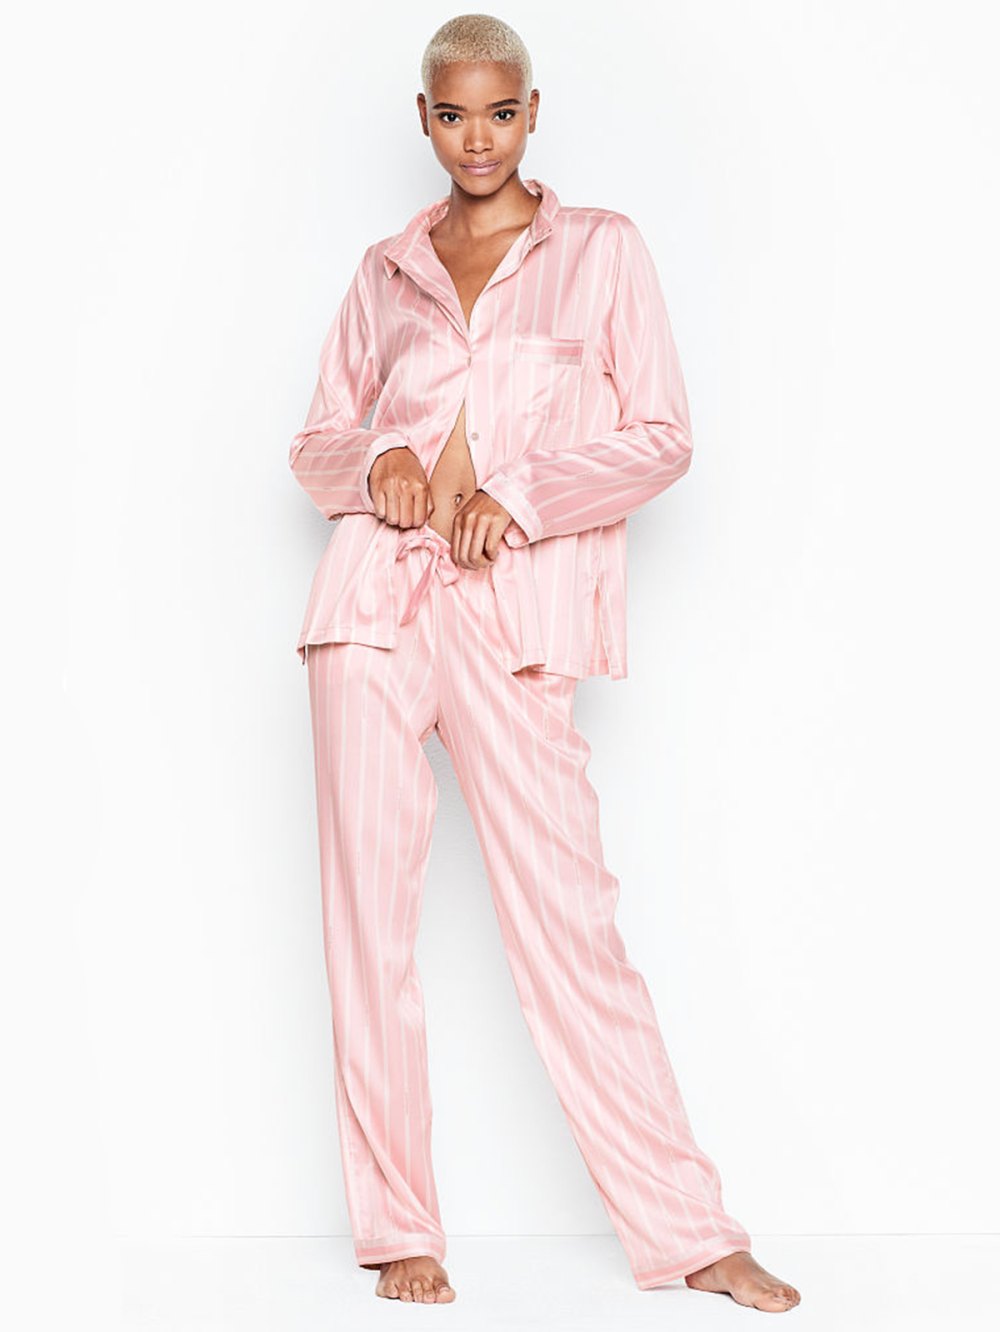 Sleep In Style With 40% Off This Victoria's Secret Satin PJ Set | Us Weekly